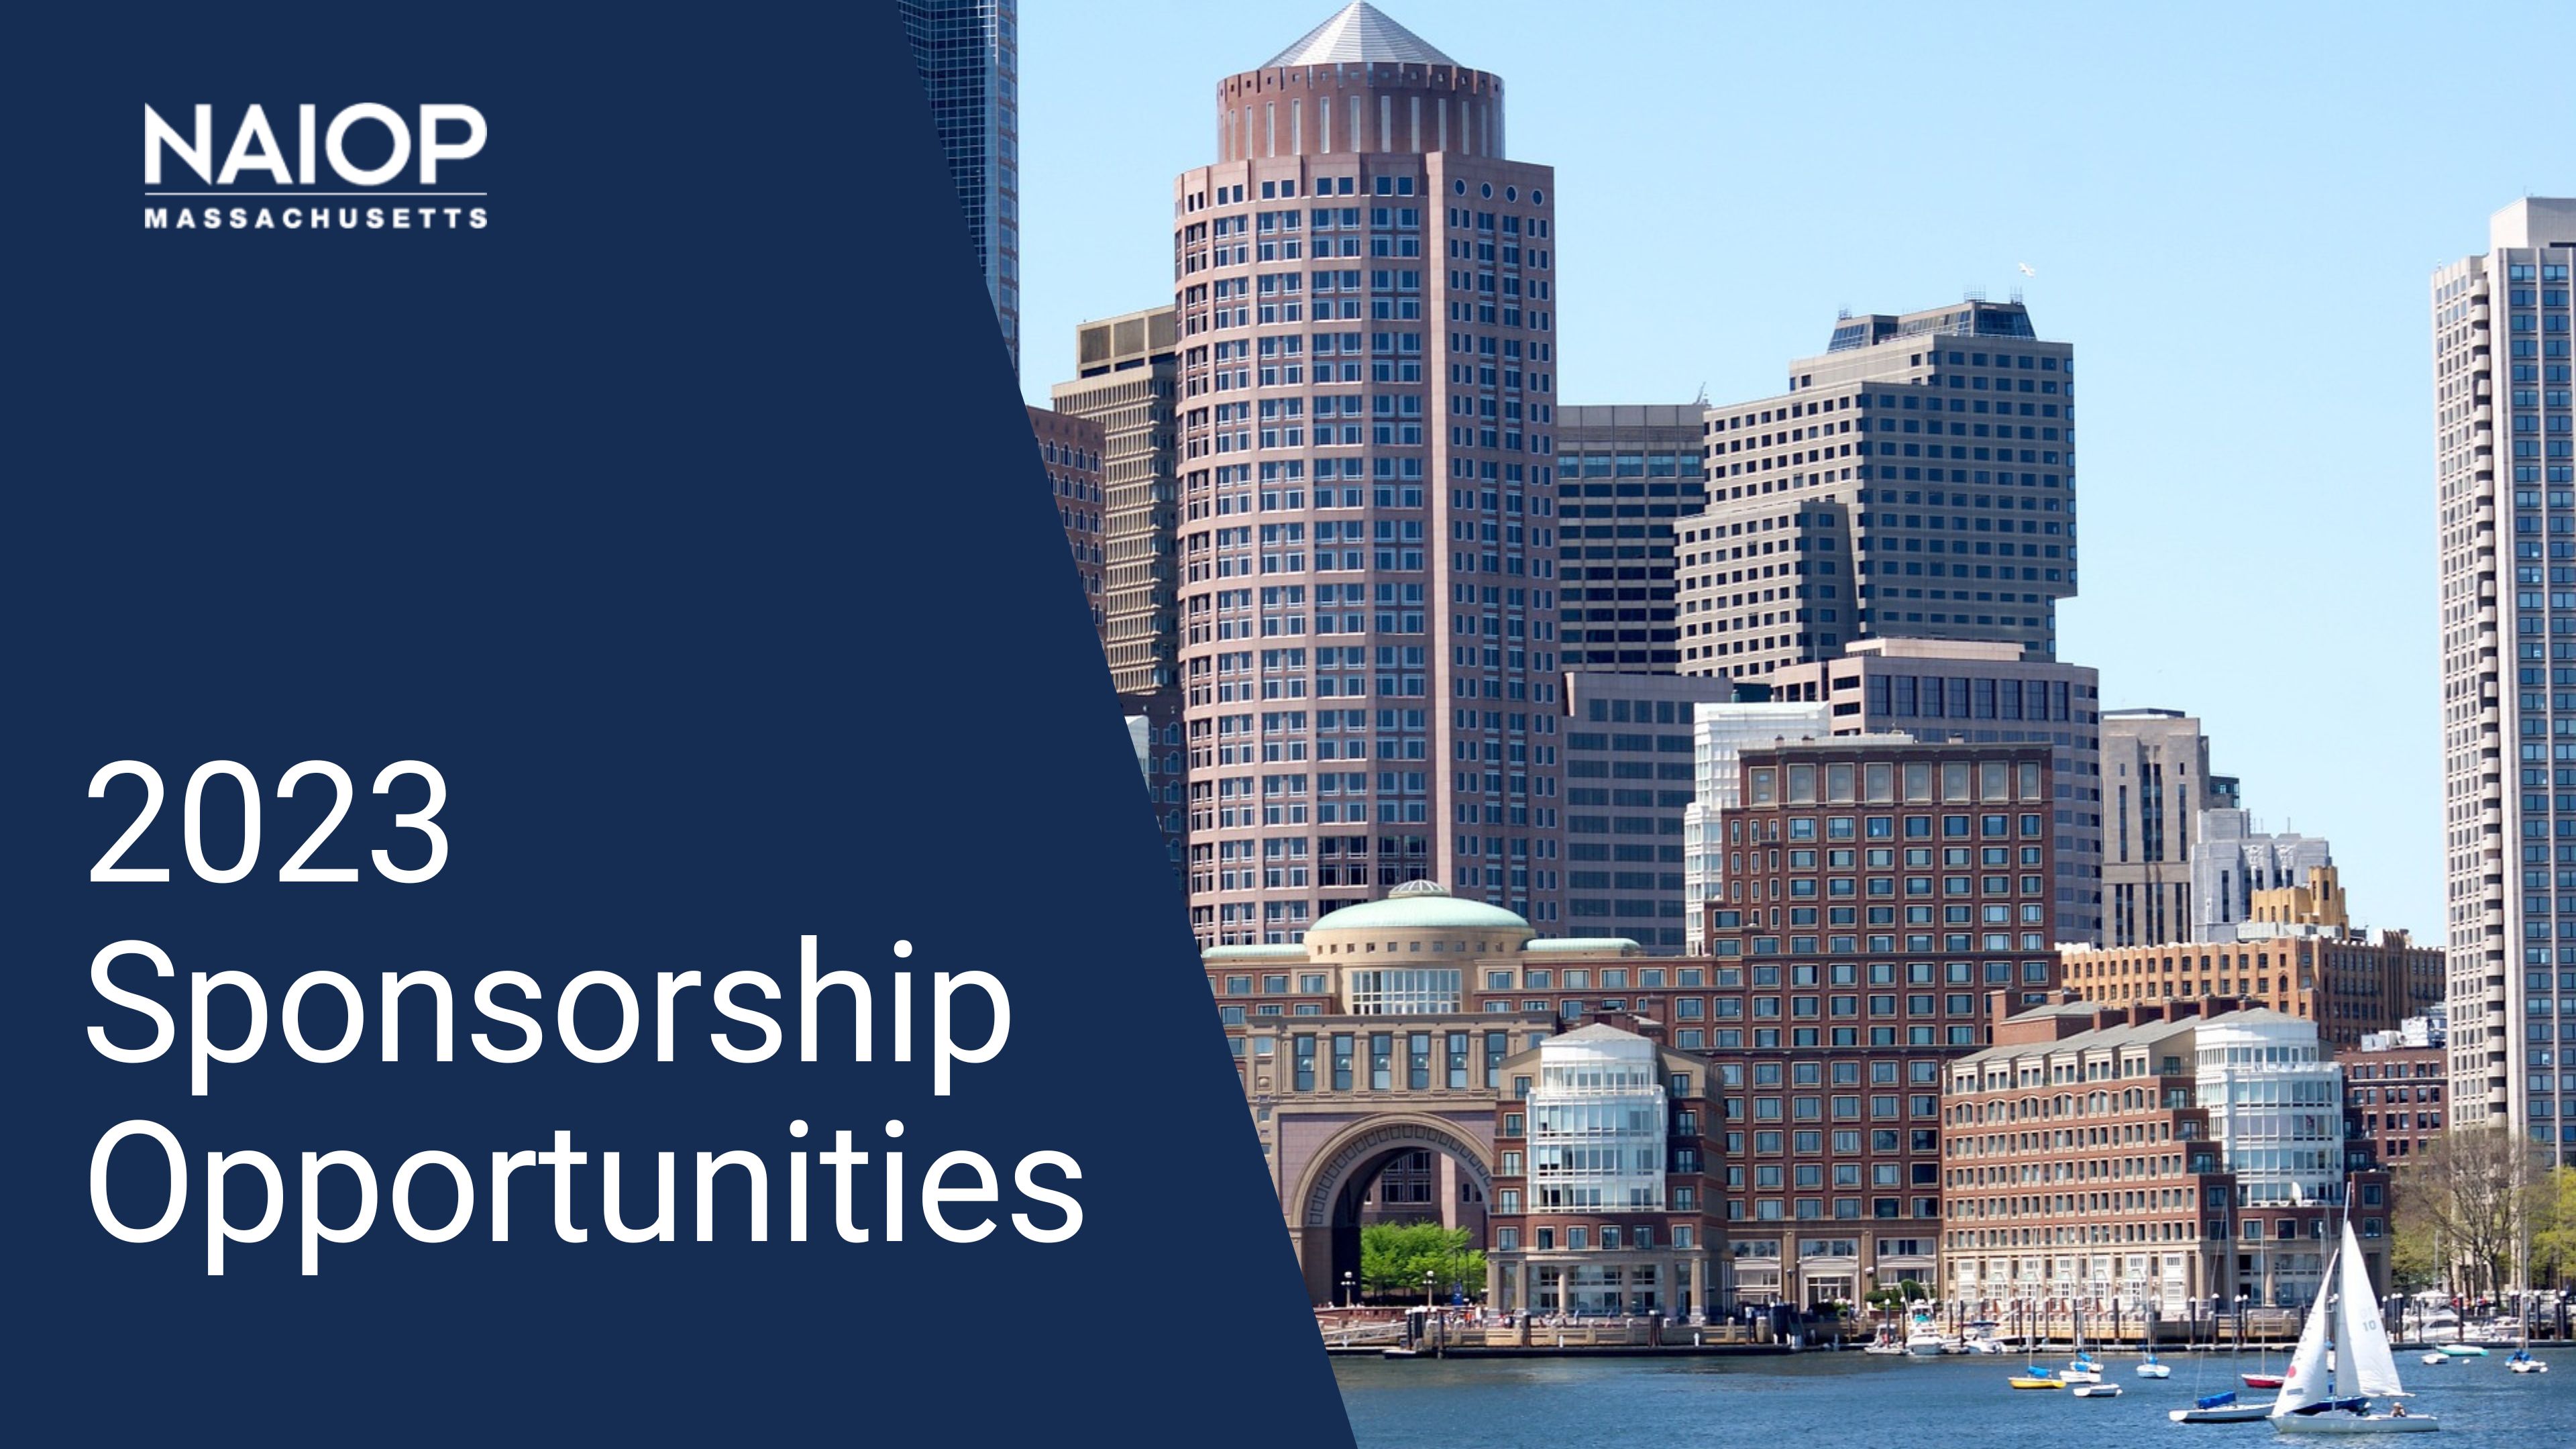 2023 NAIOP Sponsorship Opportunities (1)